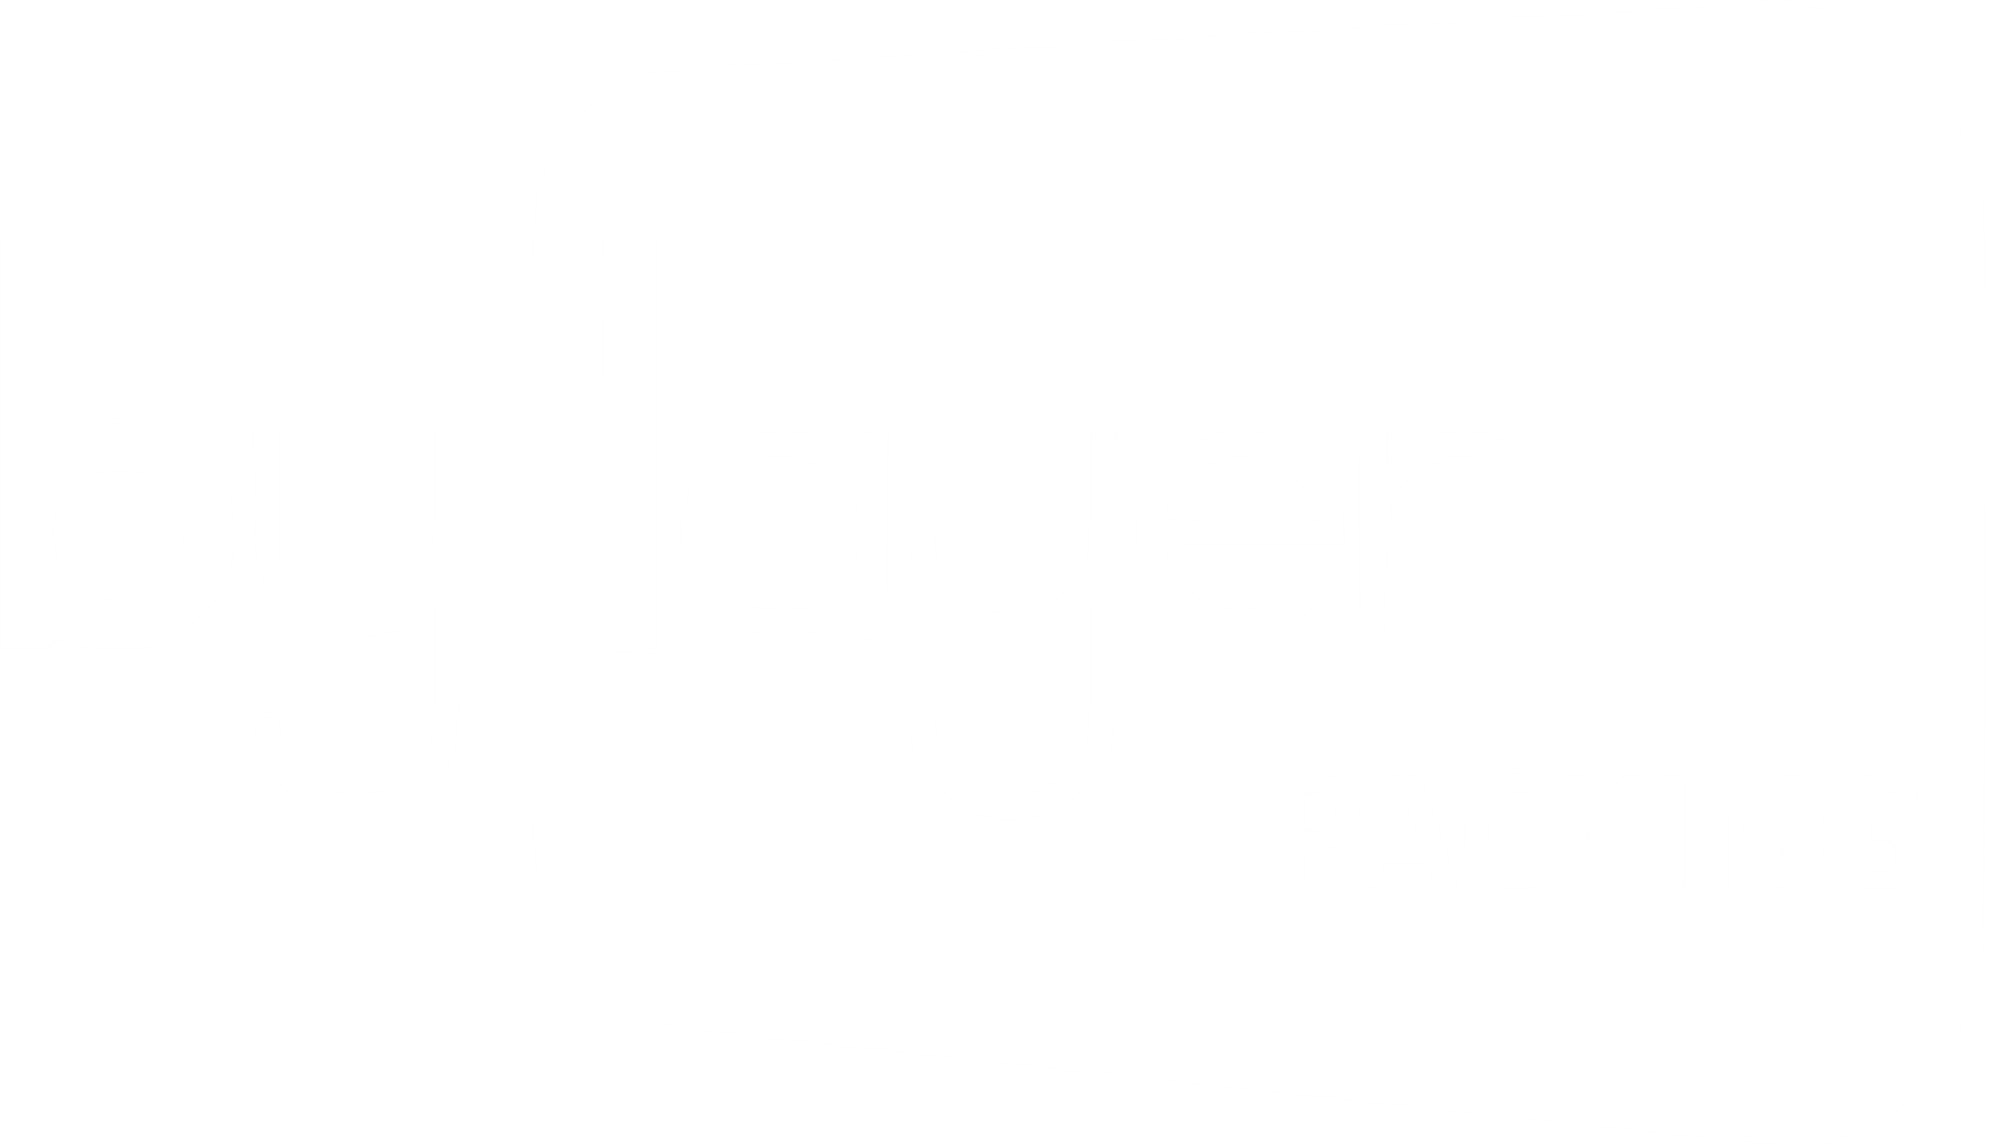 By Layer